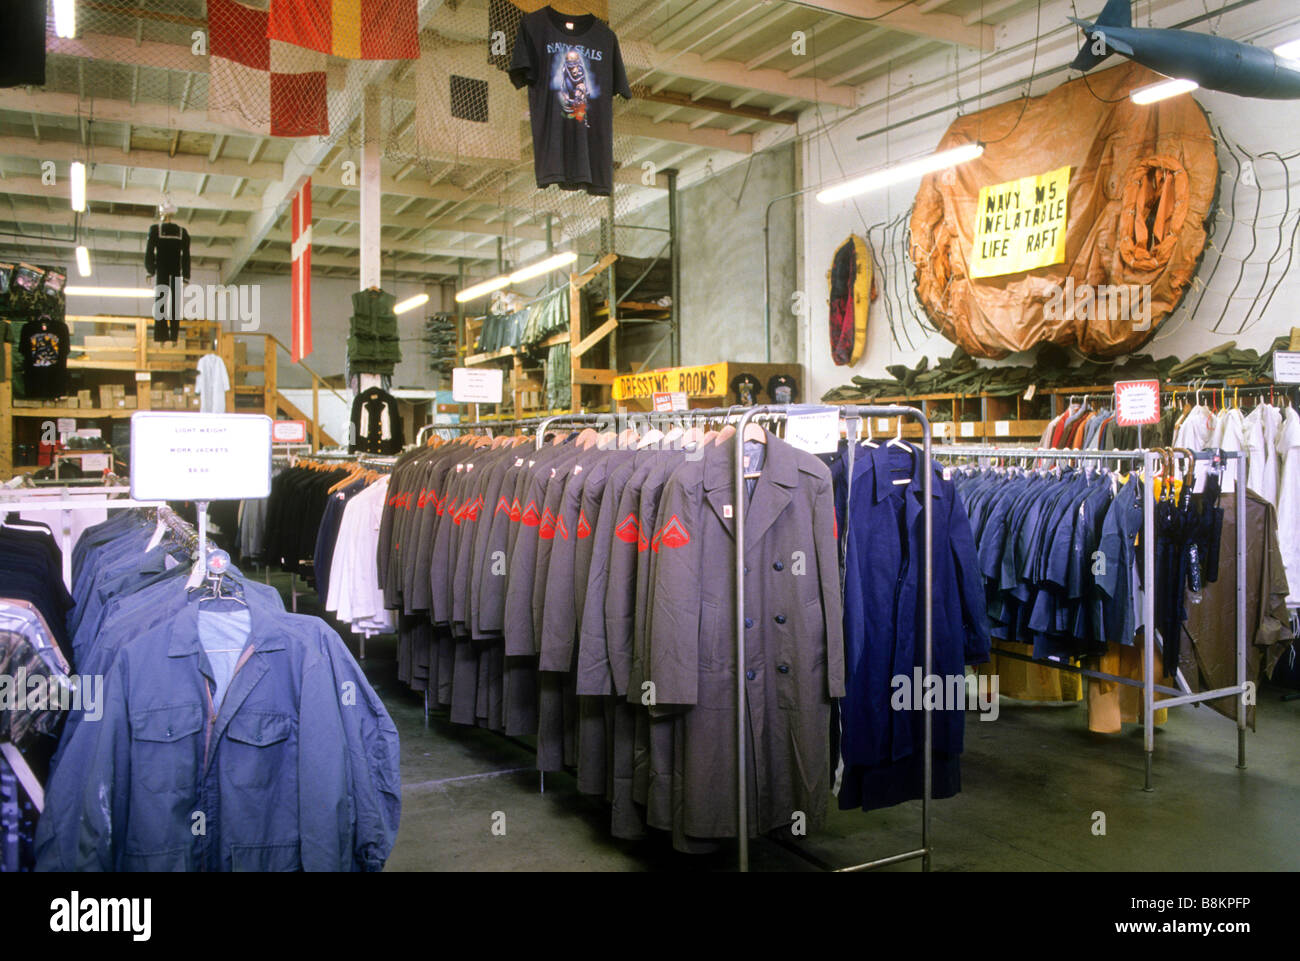 Interior of Army-Navy store with surplus military items on sale Stock Photo  - Alamy